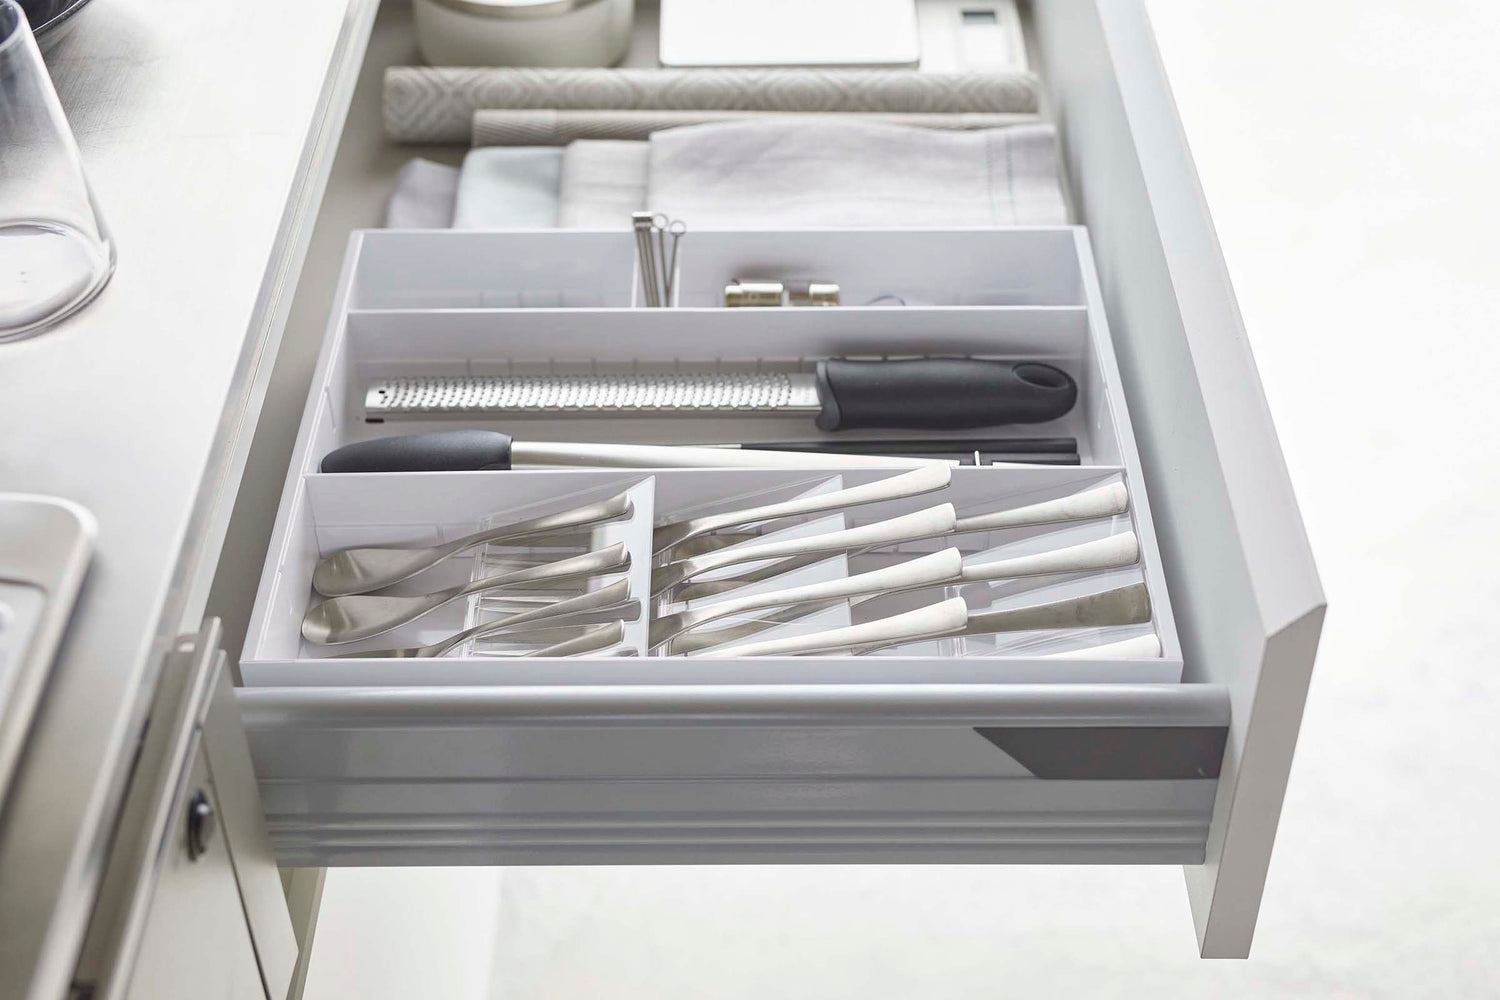 View 16 - Side view of white Expandable Cutlery Storage Organizer by Yamazaki Home.